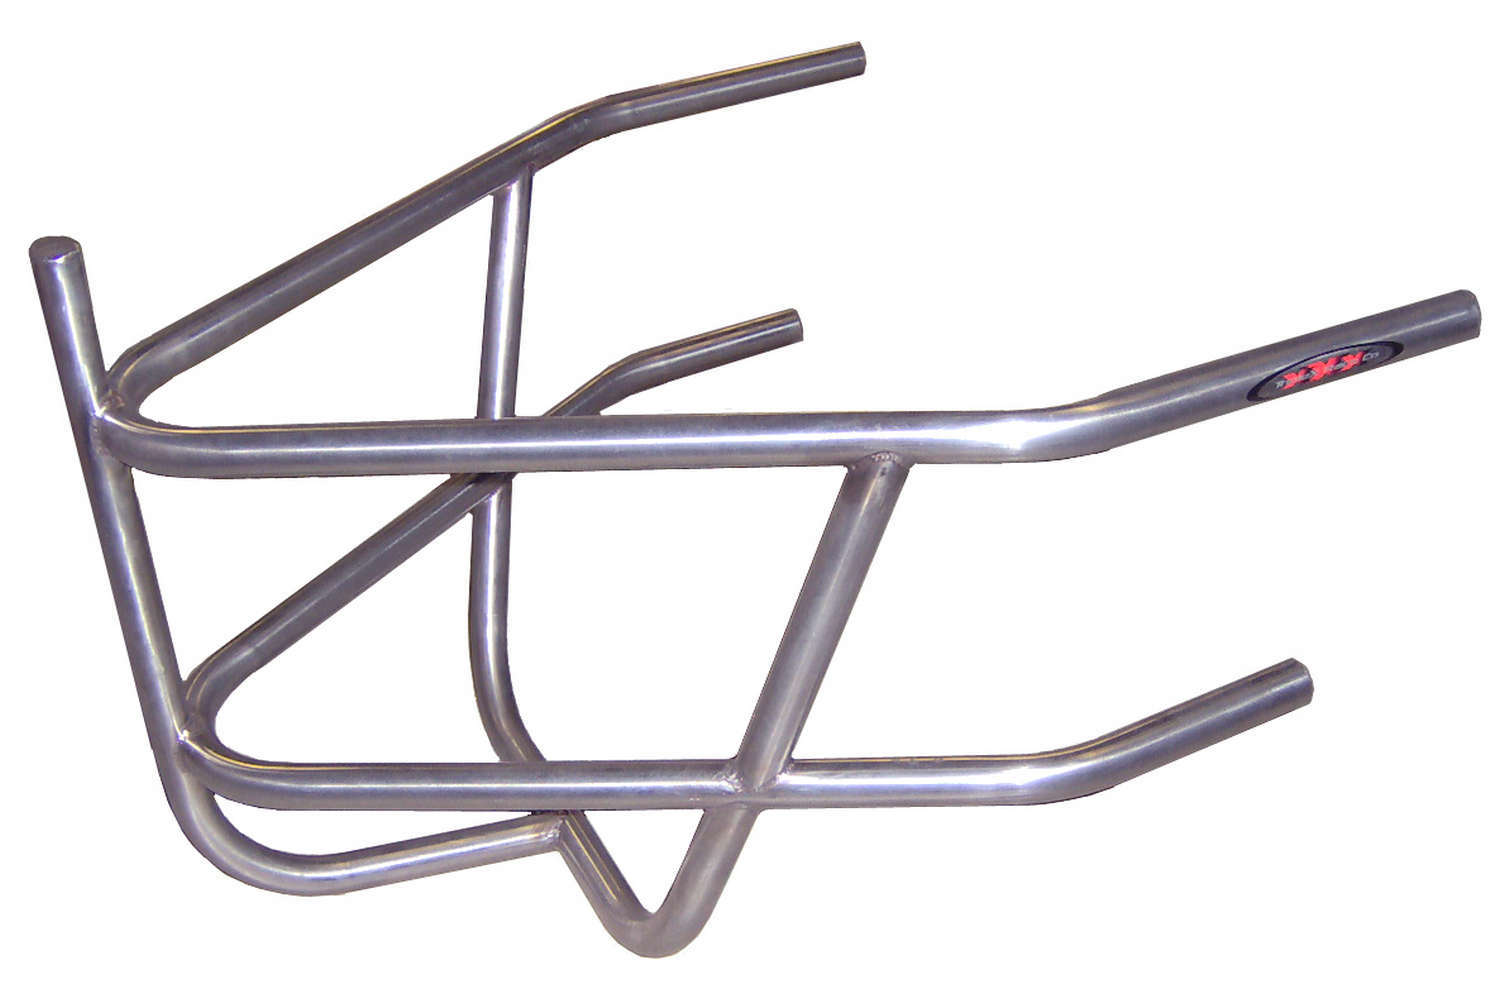 Triple X Race Components 600-BN-0006 Bumper, Post, Braces, Rear, 3/4 in Tube, Stainless, Natural, Triple X Mini, Each